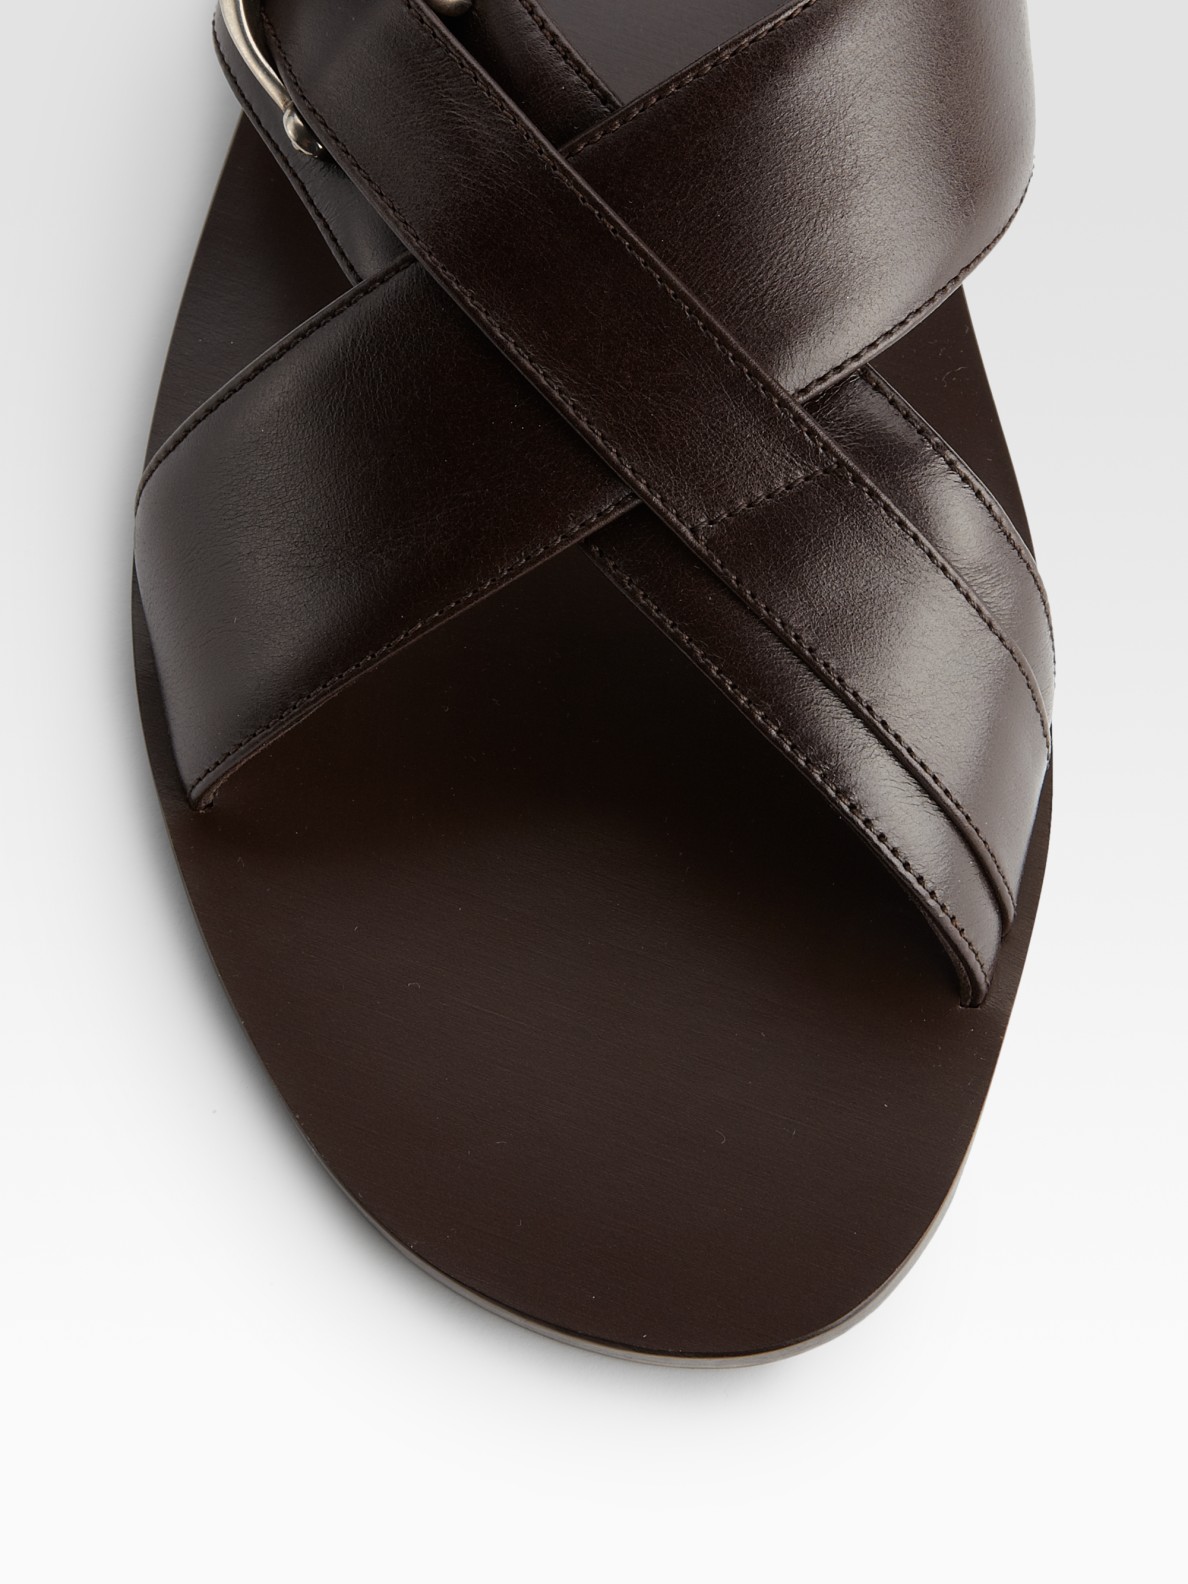 mens gucci leather sandals